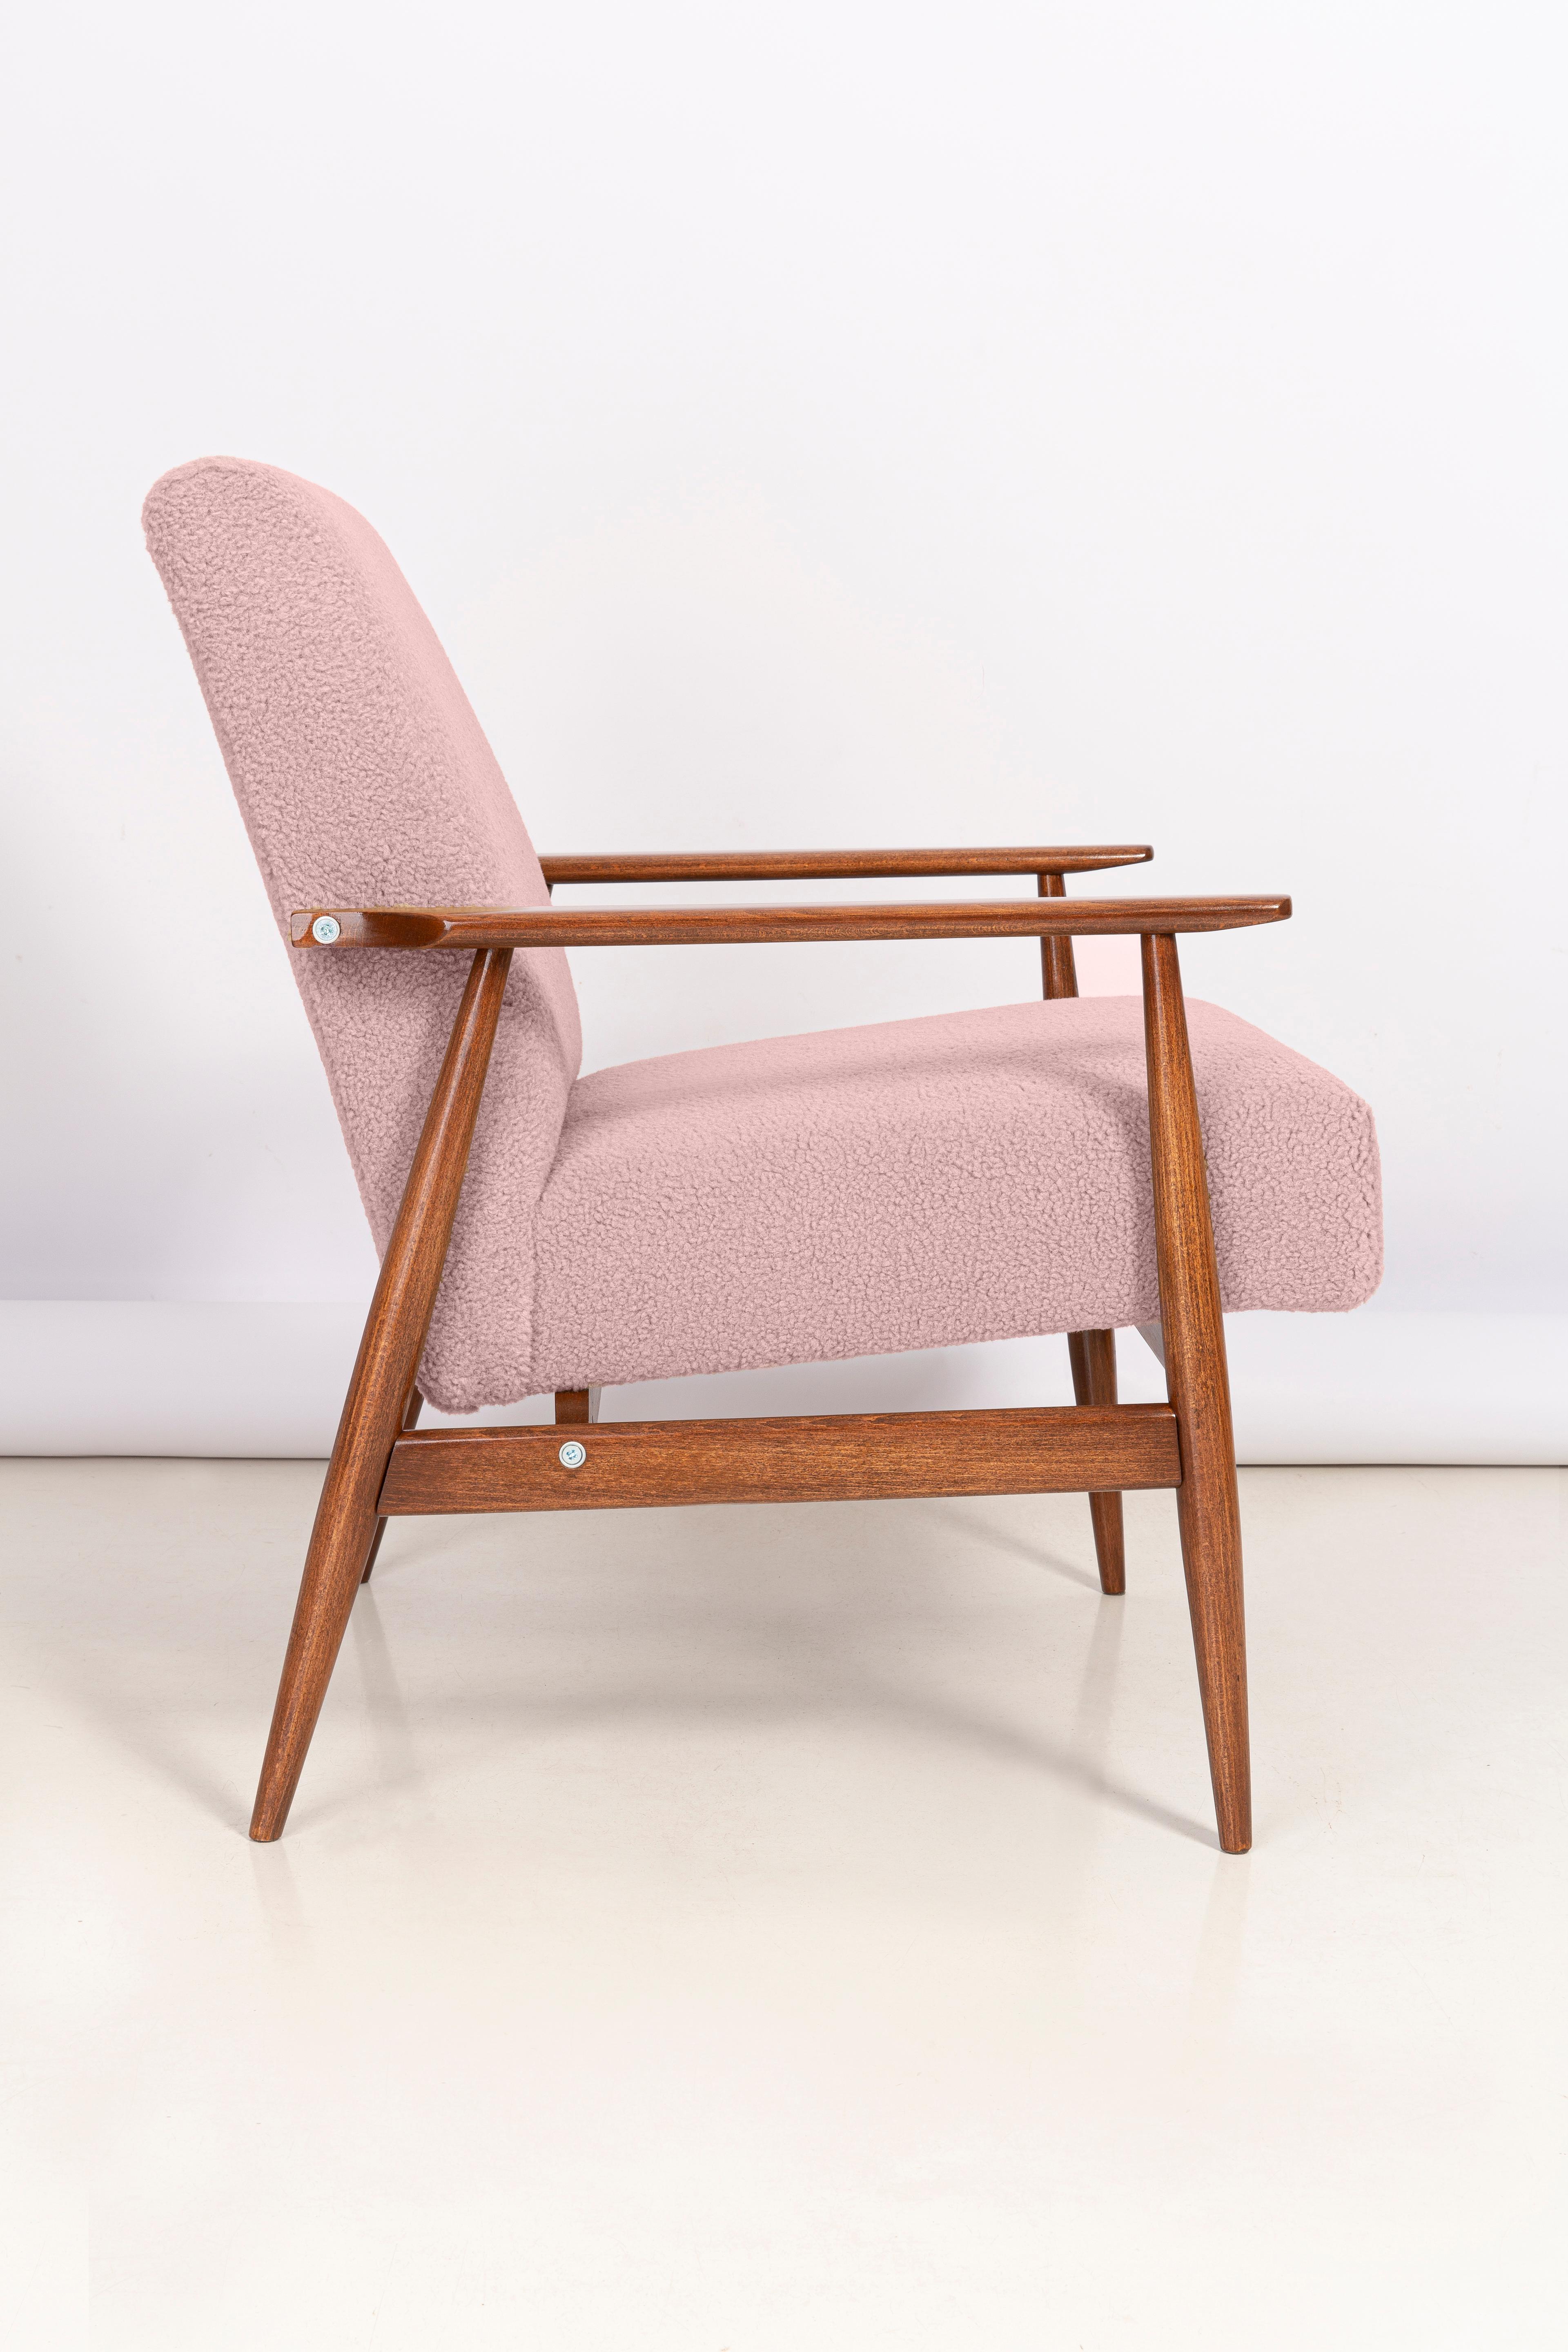 Hand-Crafted Dusty Pink Bouclé Dante Armchair, H. Lis, Europe, 1960s For Sale